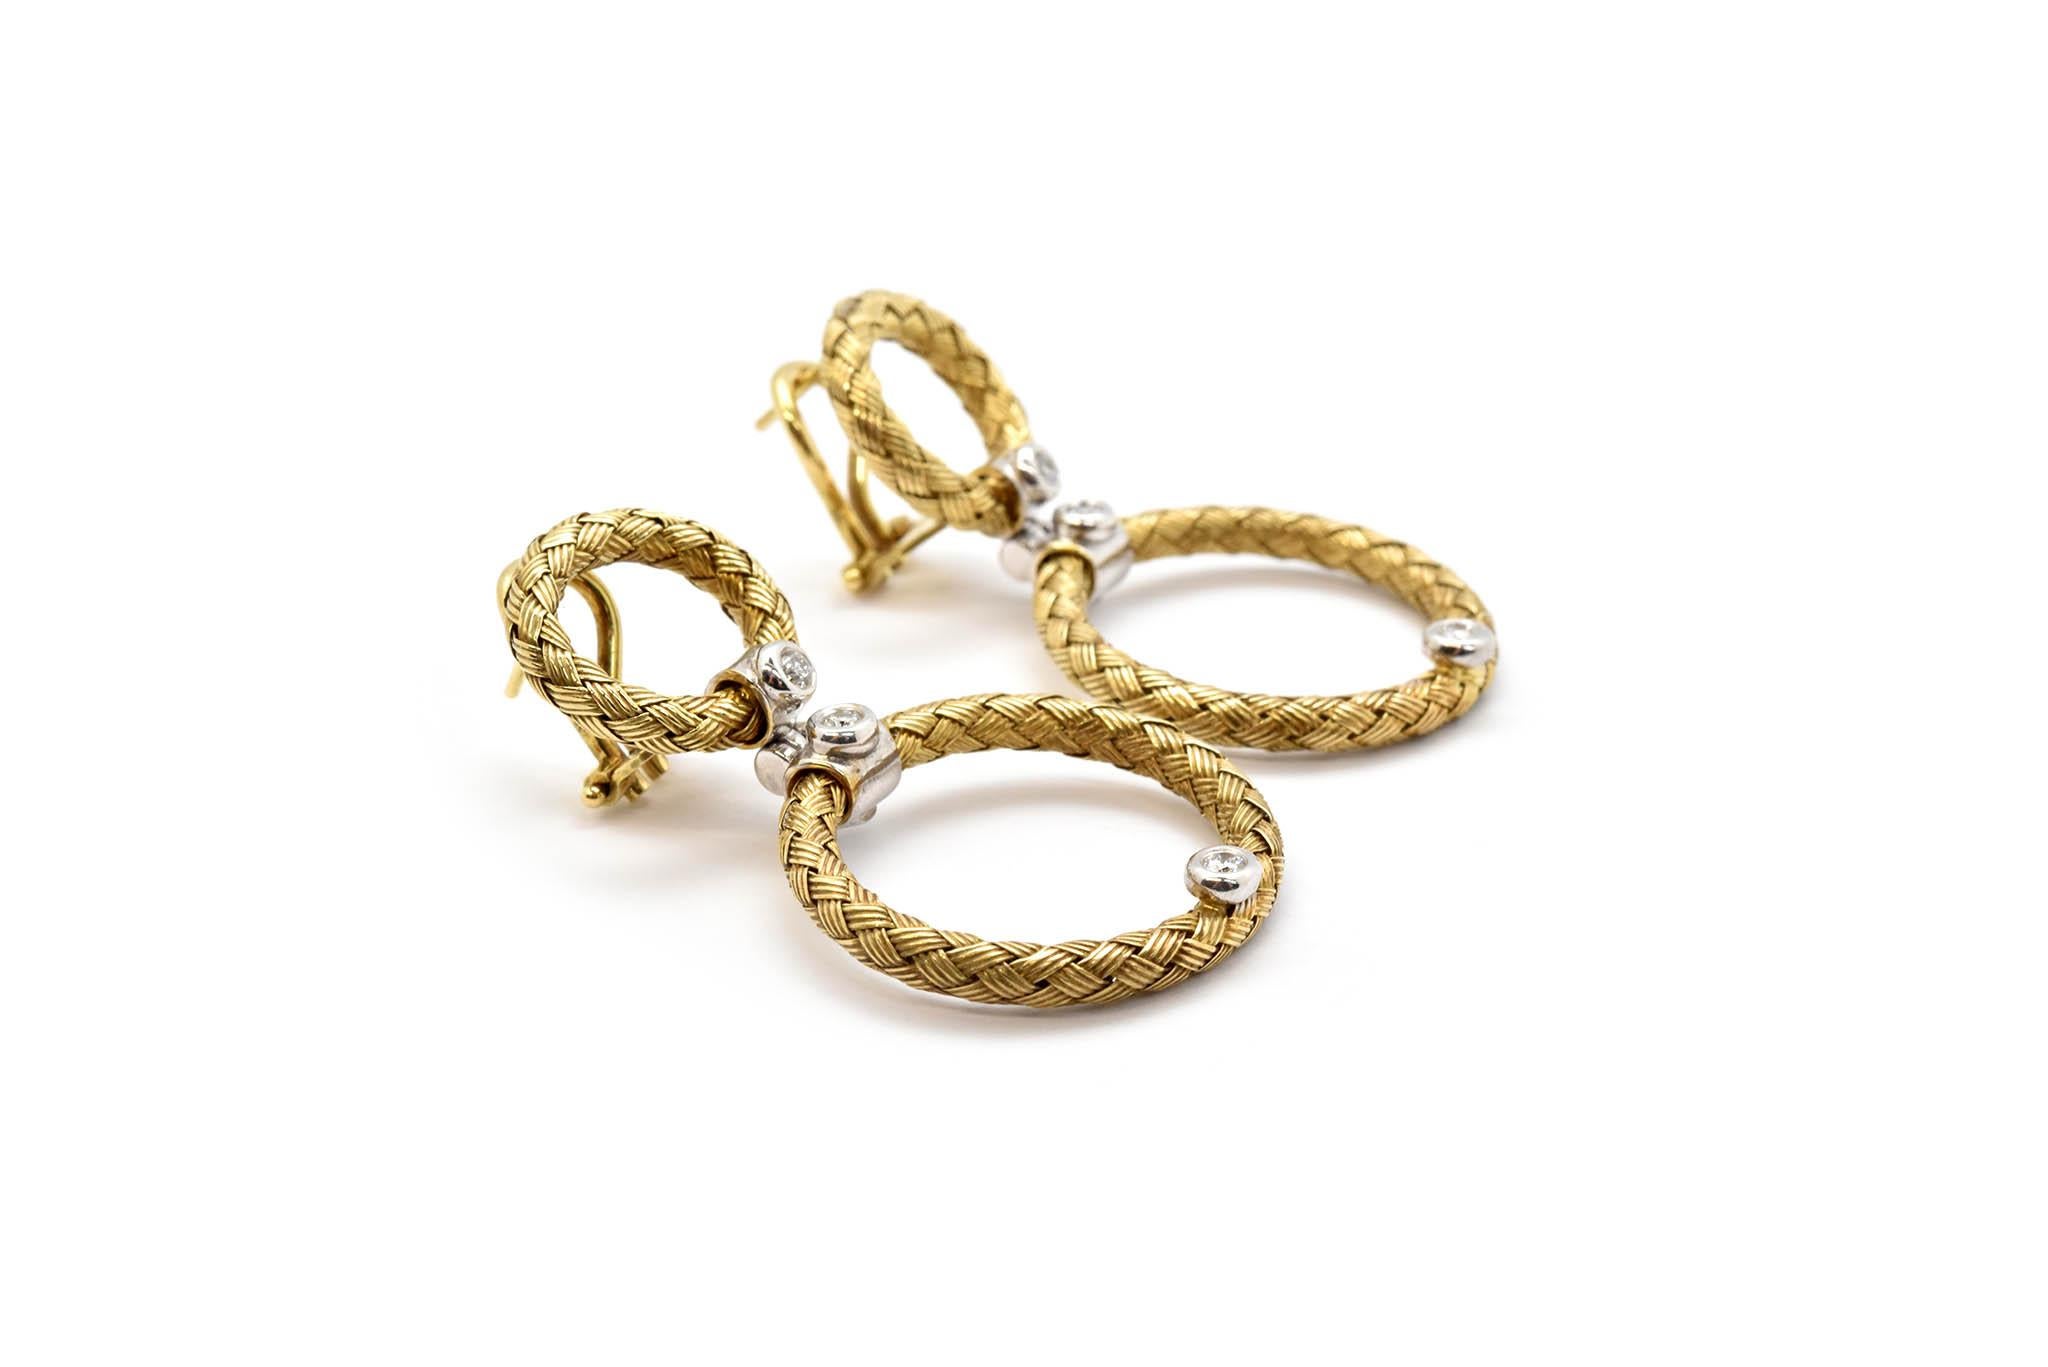 These earrings are made in 14k yellow gold by designer Daniel W. The earrings have a woven texture to them, and they are set with round diamonds. The diamonds have a total weight of 0.30ct, and they are graded H in color and SI in clarity. The